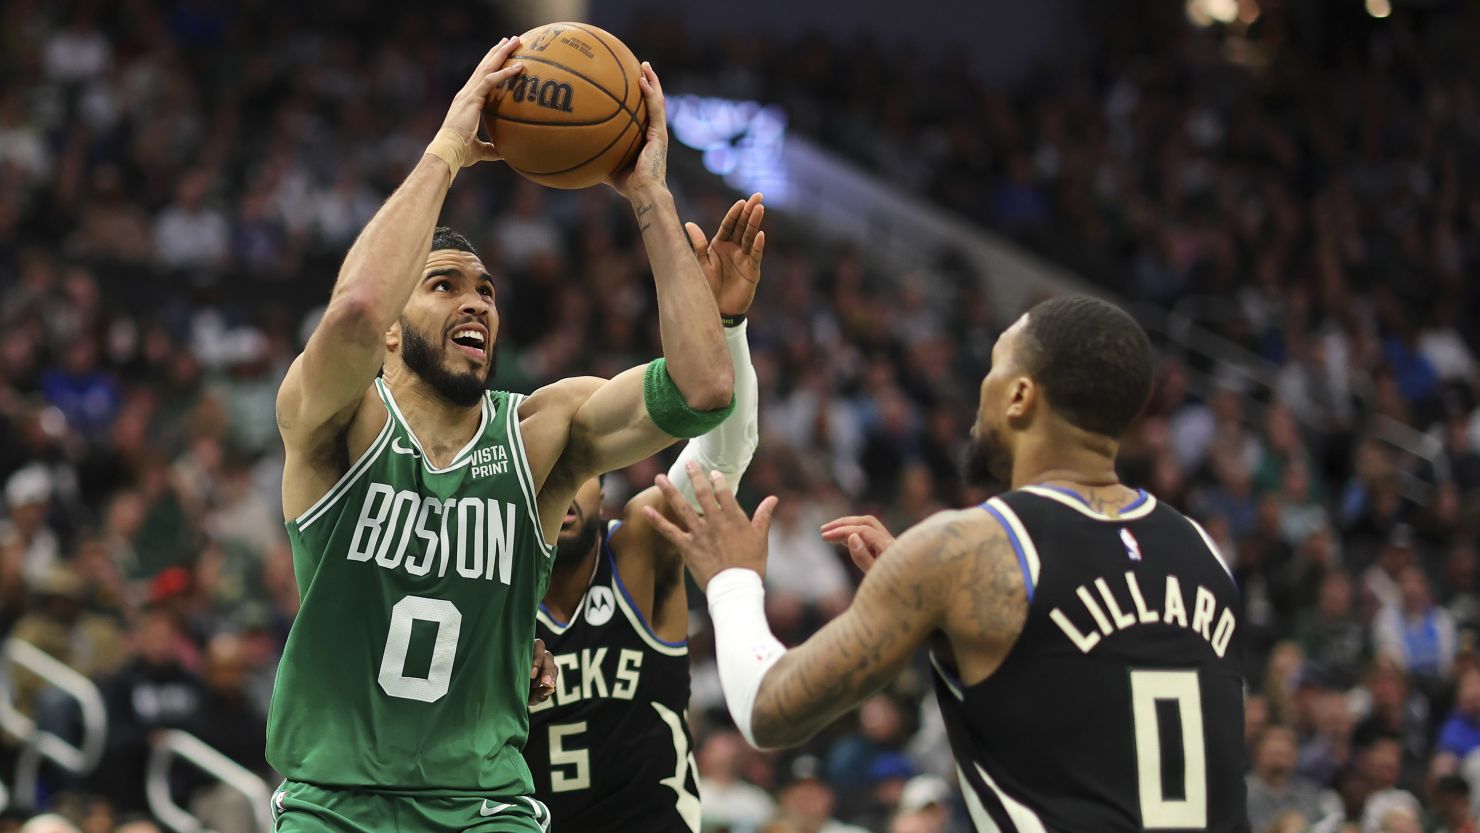 Jayson Tatum and the Boston Celtics earned an ignominious record in their loss to the Milwaukee Bucks on Tuesday.